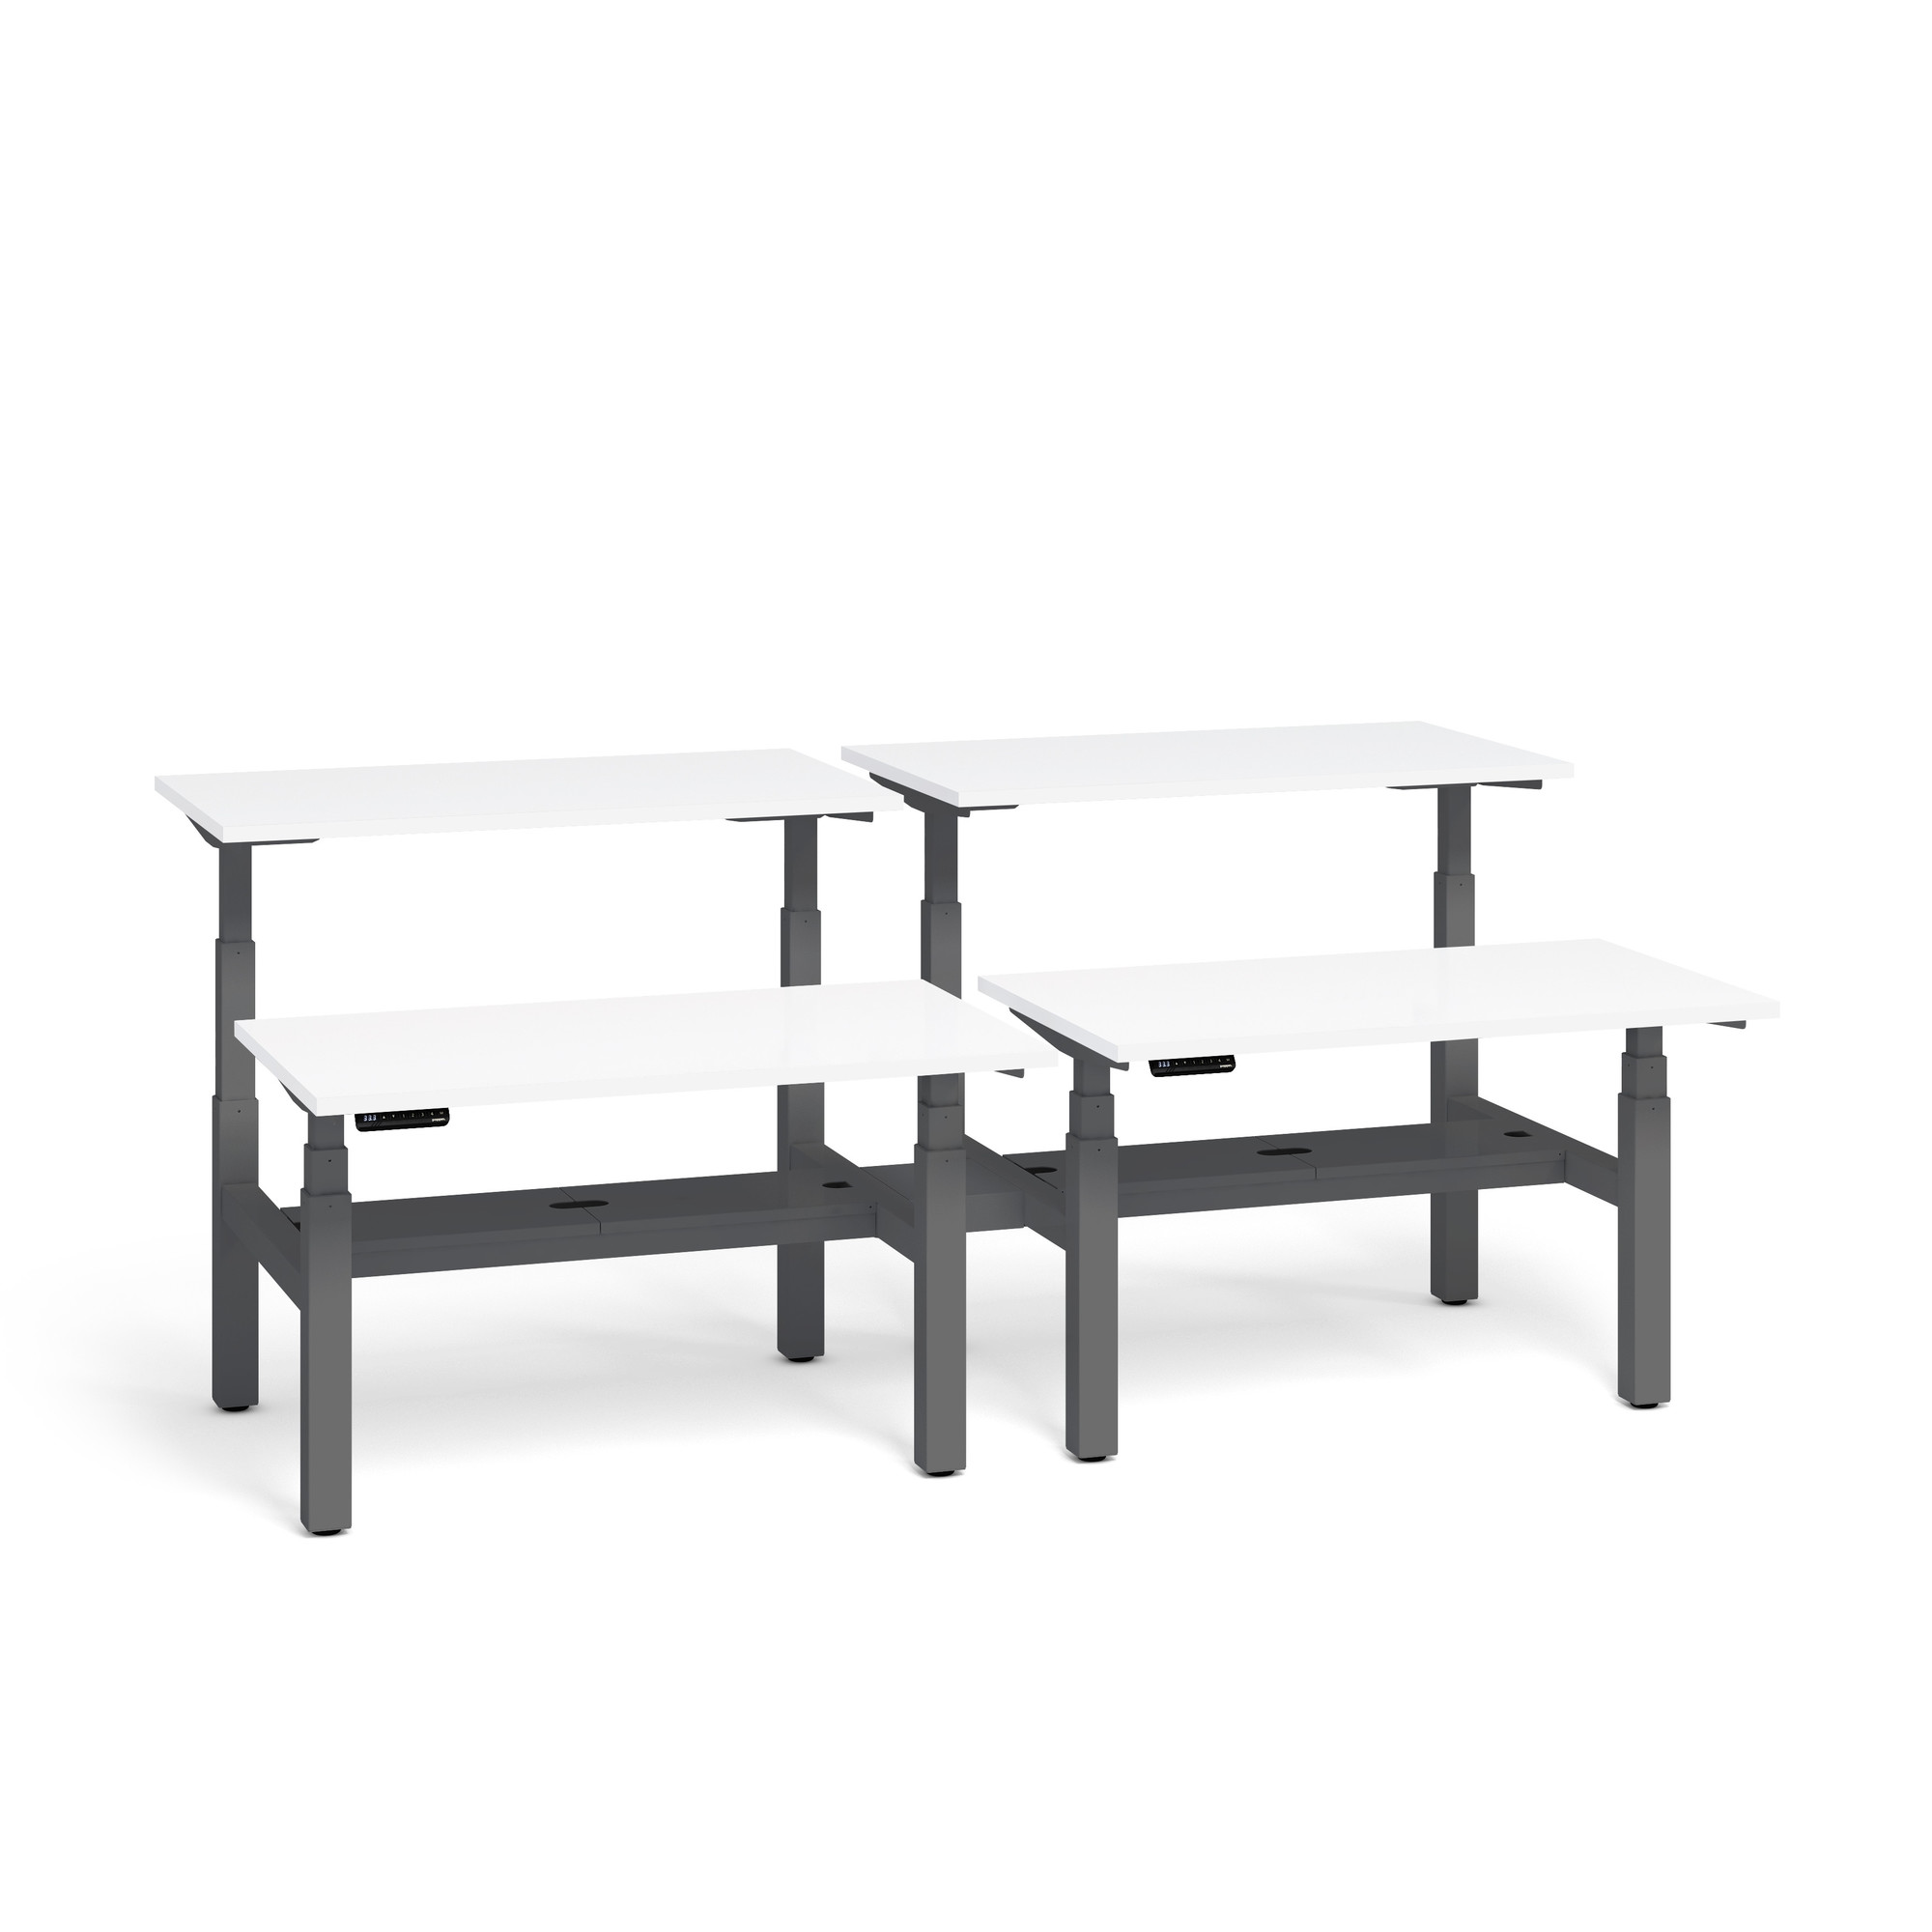 Series L Adjustable Height Double Desk For 4 Charcoal Legs